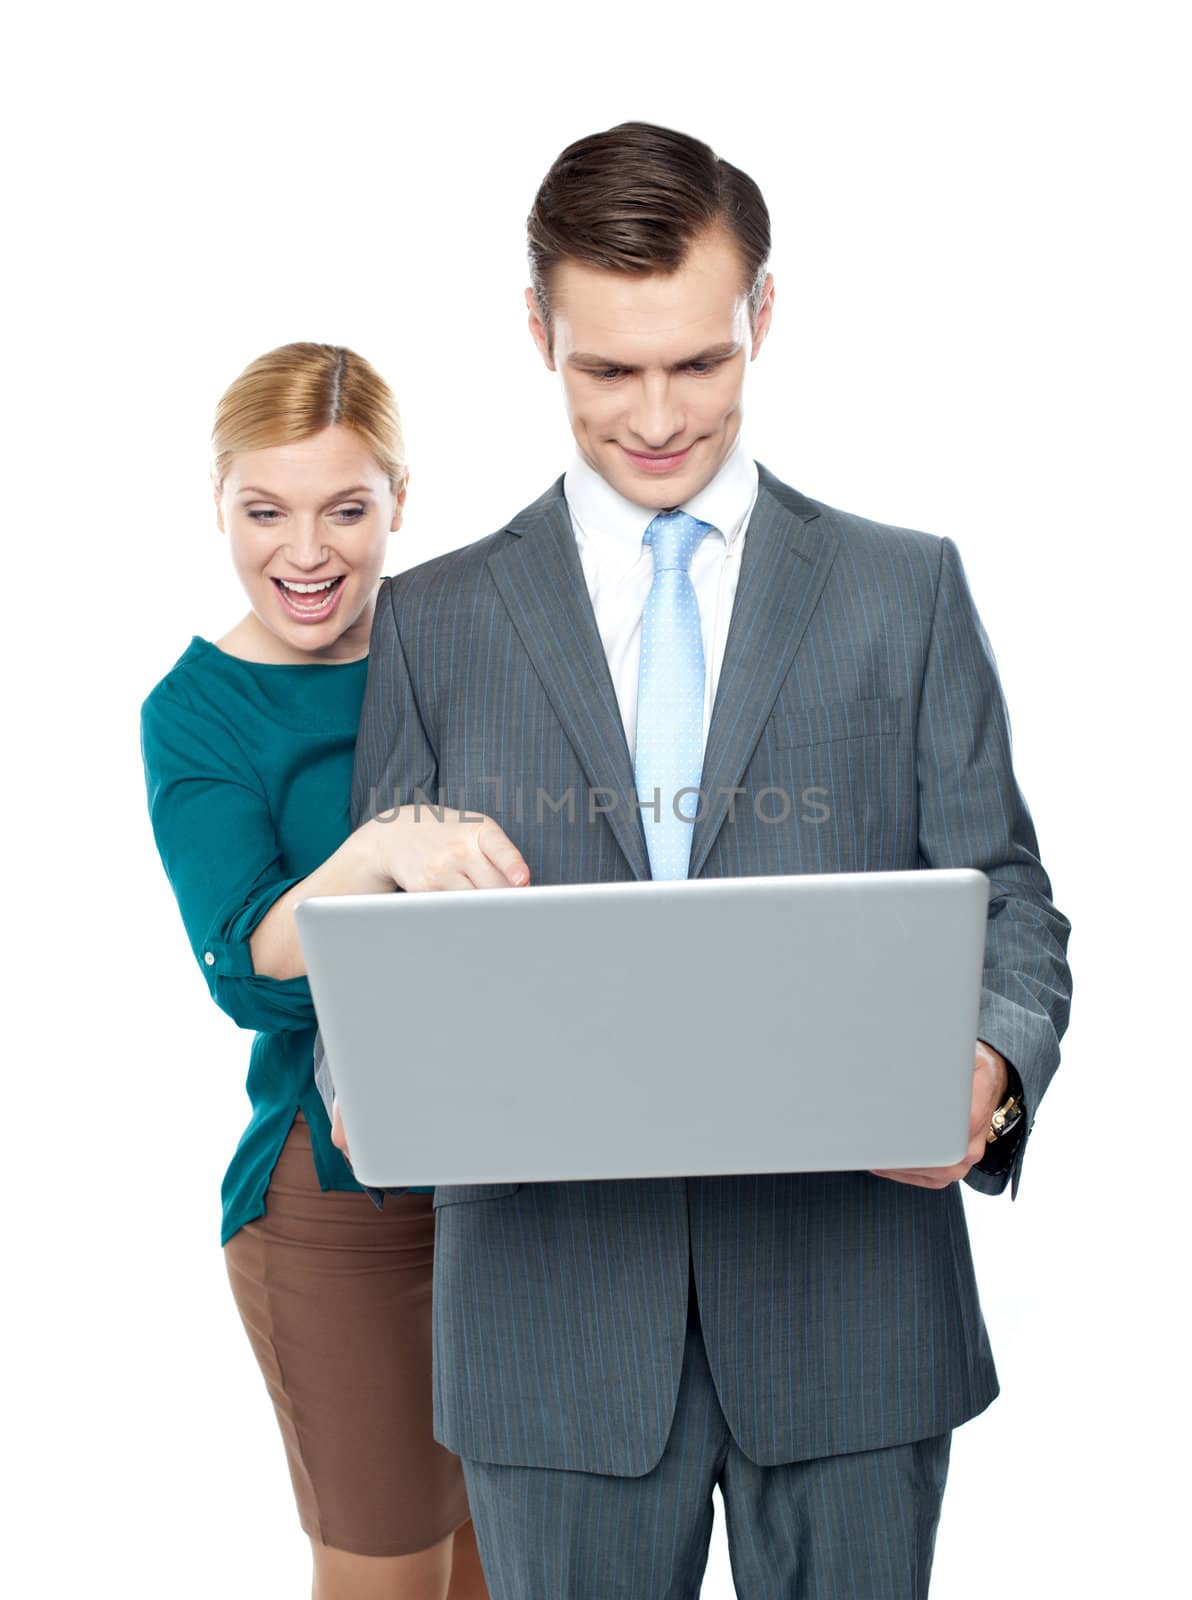 Smiling business people using laptop by stockyimages